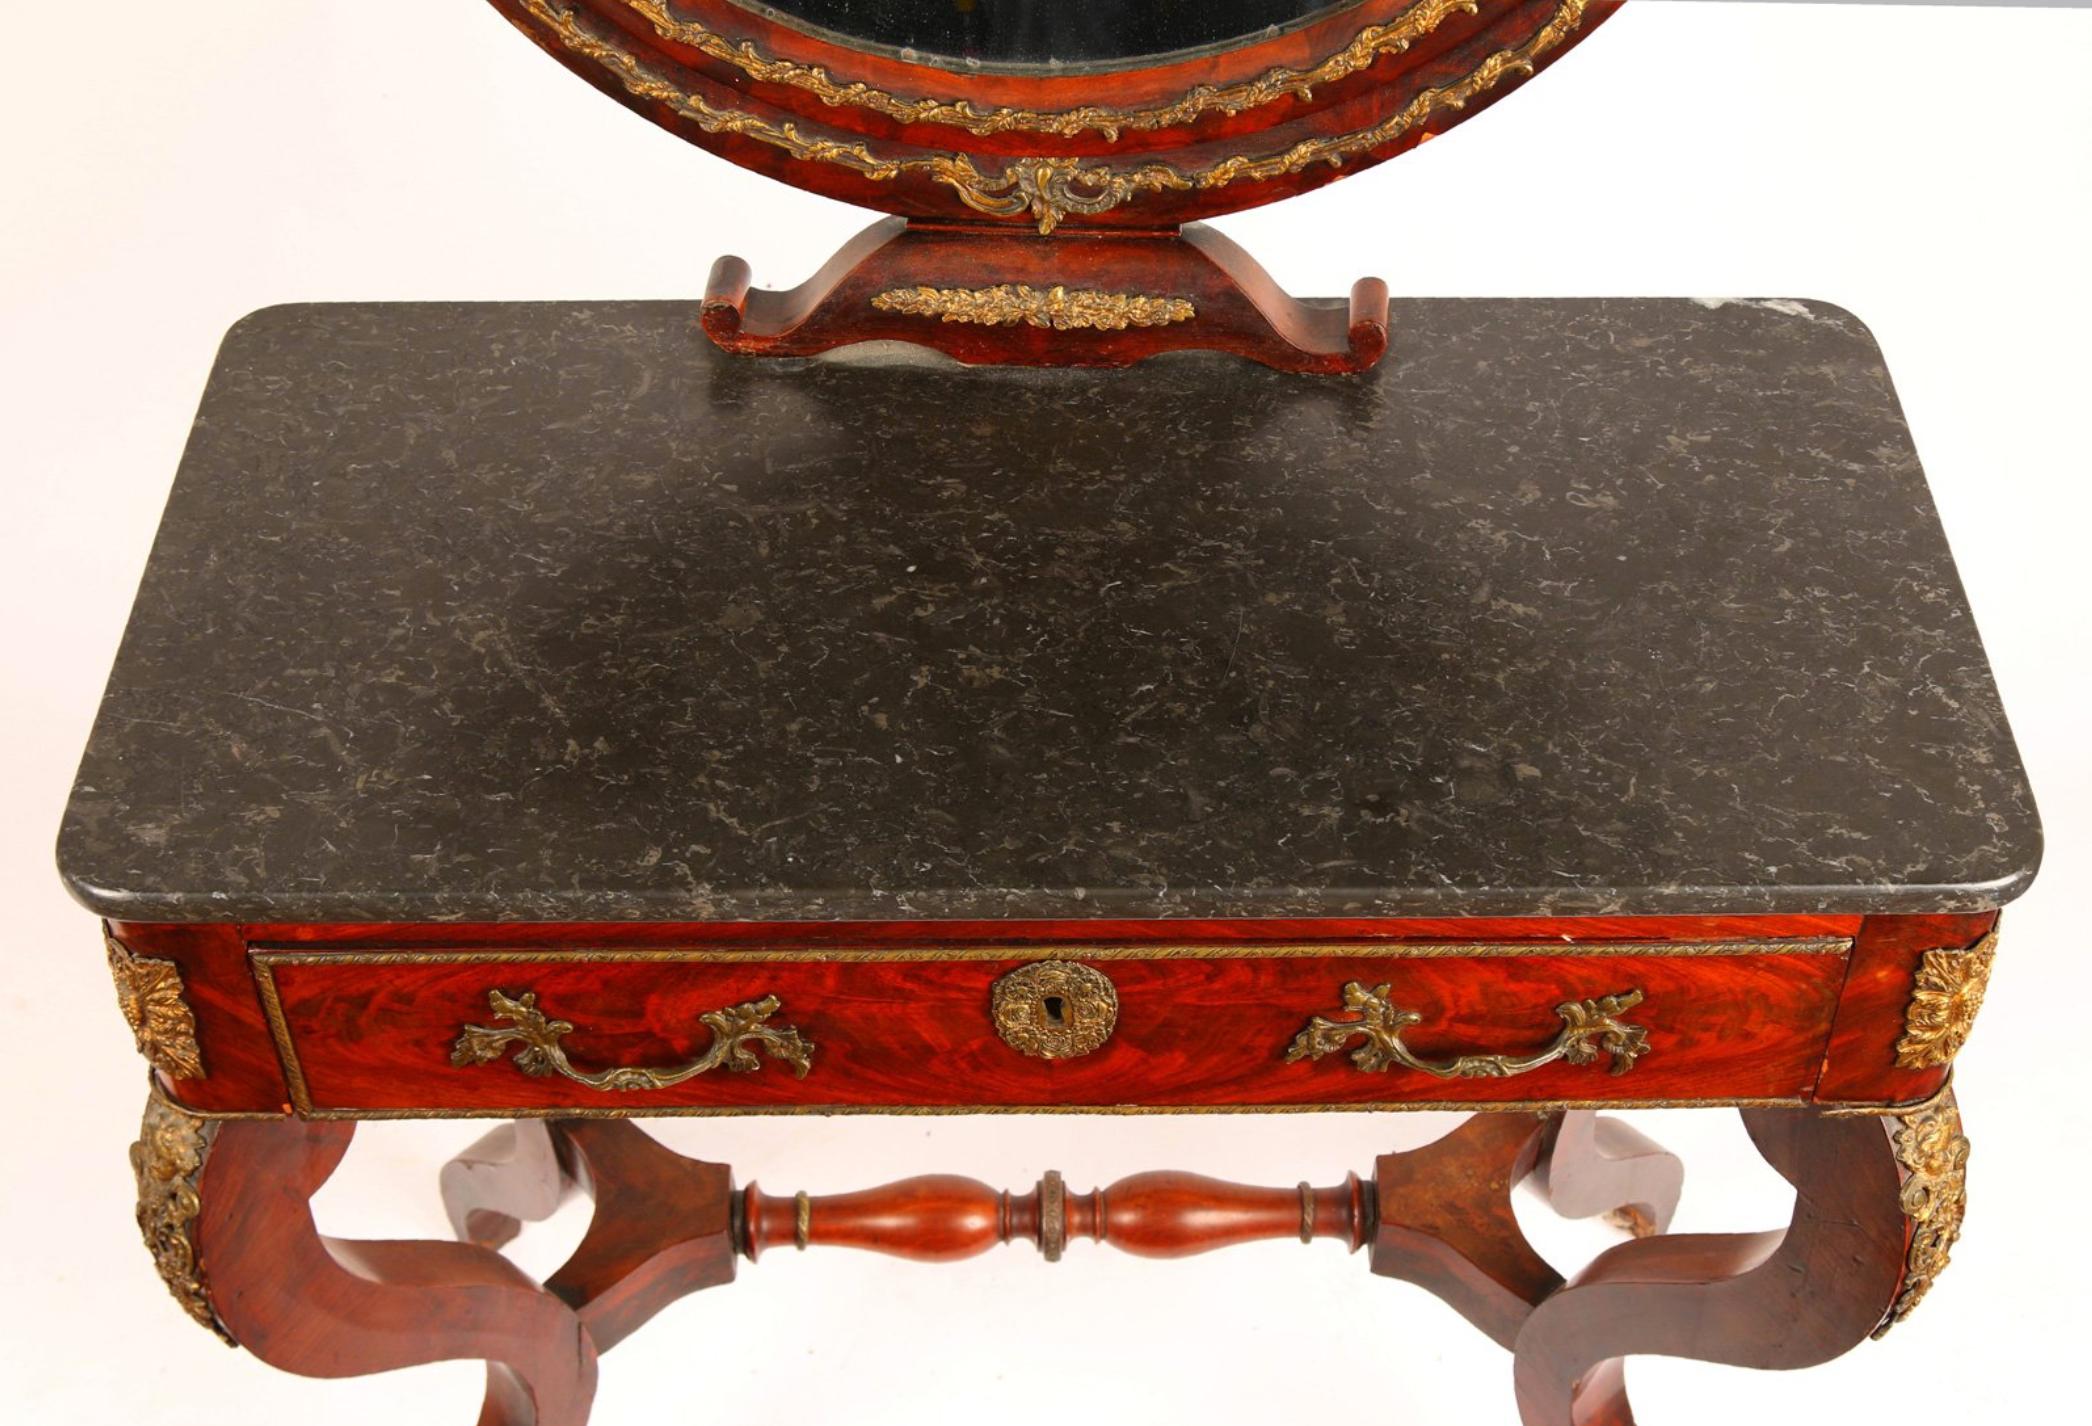 French hand carved mahogany vanity table with black marble top. There is an original crystal oval mirror on the top part surrounded by two asymmetrical swan's heads. The piece is raised on stable cross legs connected in between. There is one large